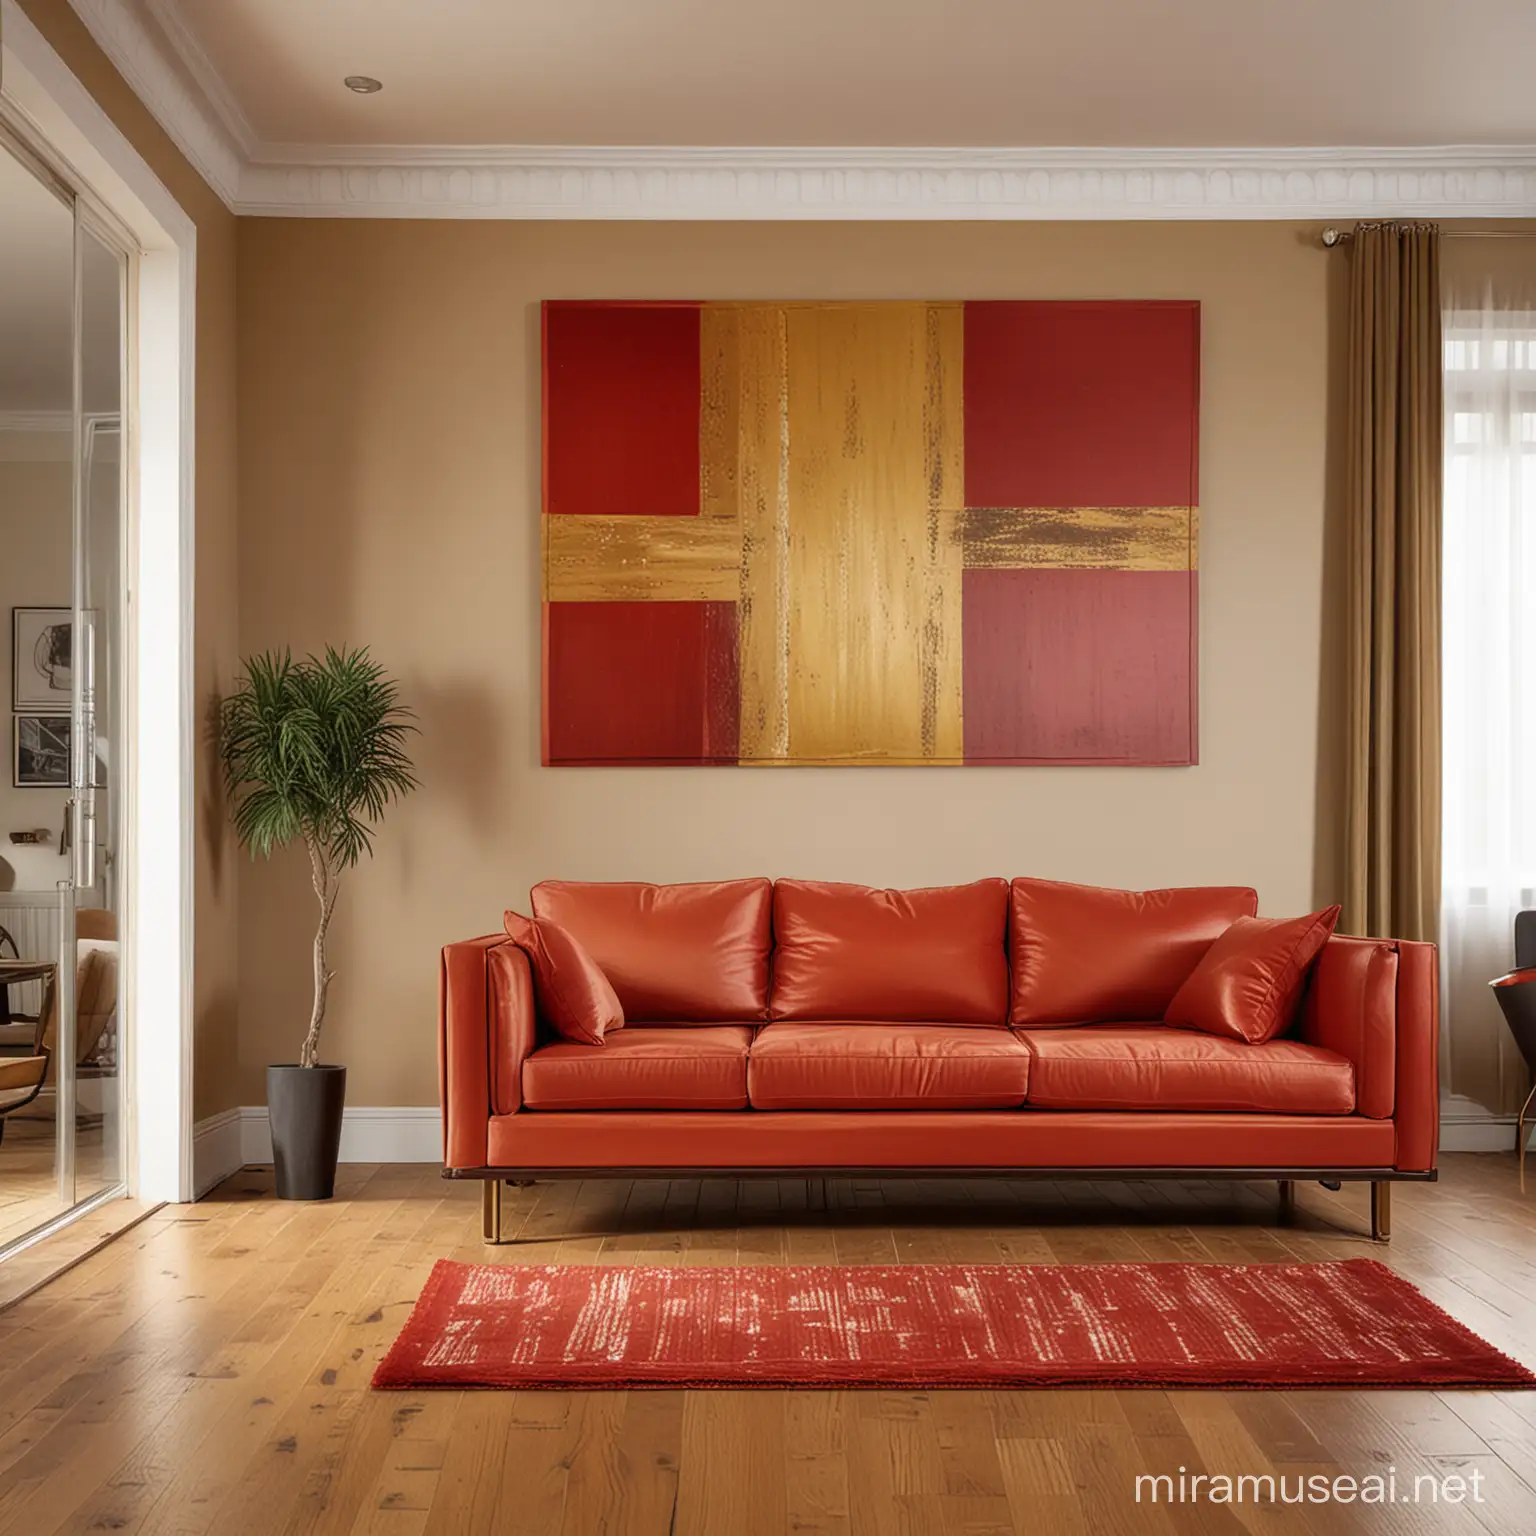 A living room in gold, brown and red. It has a wooden floor. A rectangular work hangs upright behind the sofa. Real, lively, detailed, light and shadow